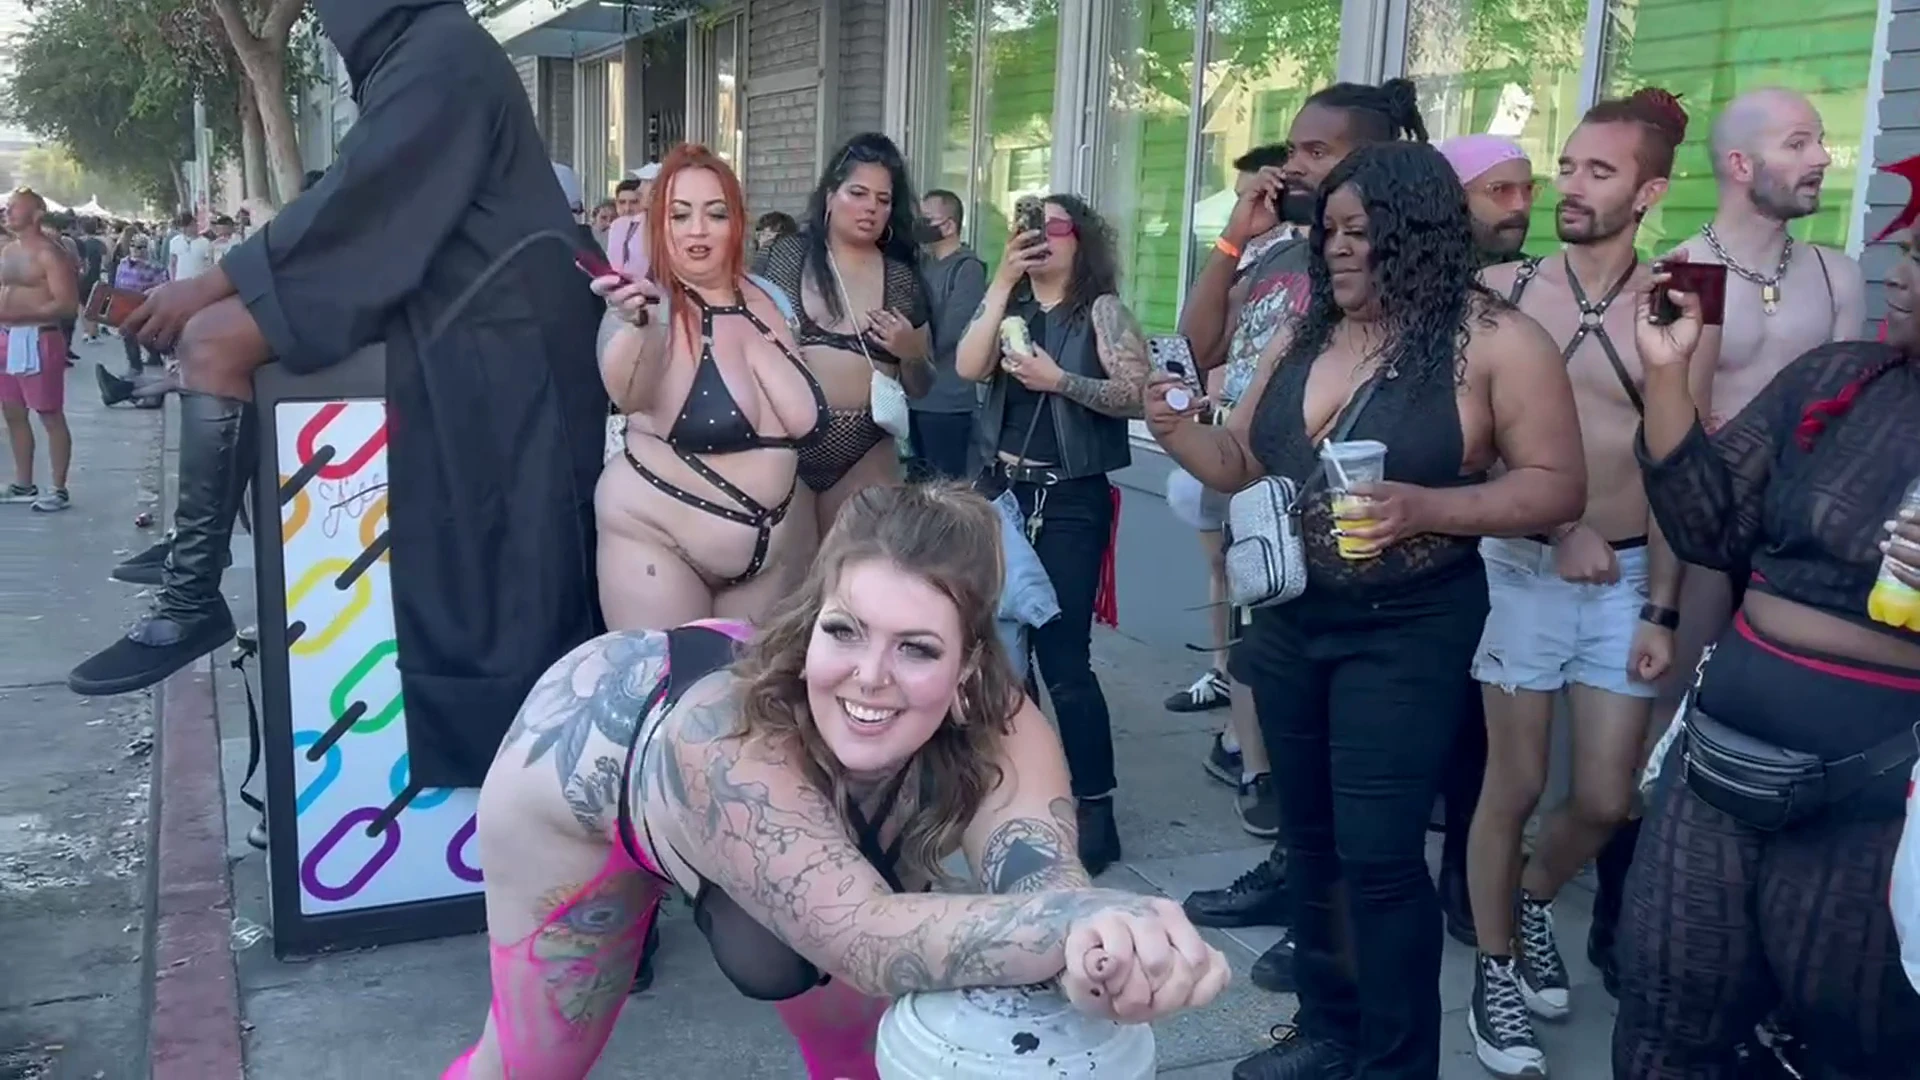 Thick girl gets whipped at Folsom Street Fair 2022